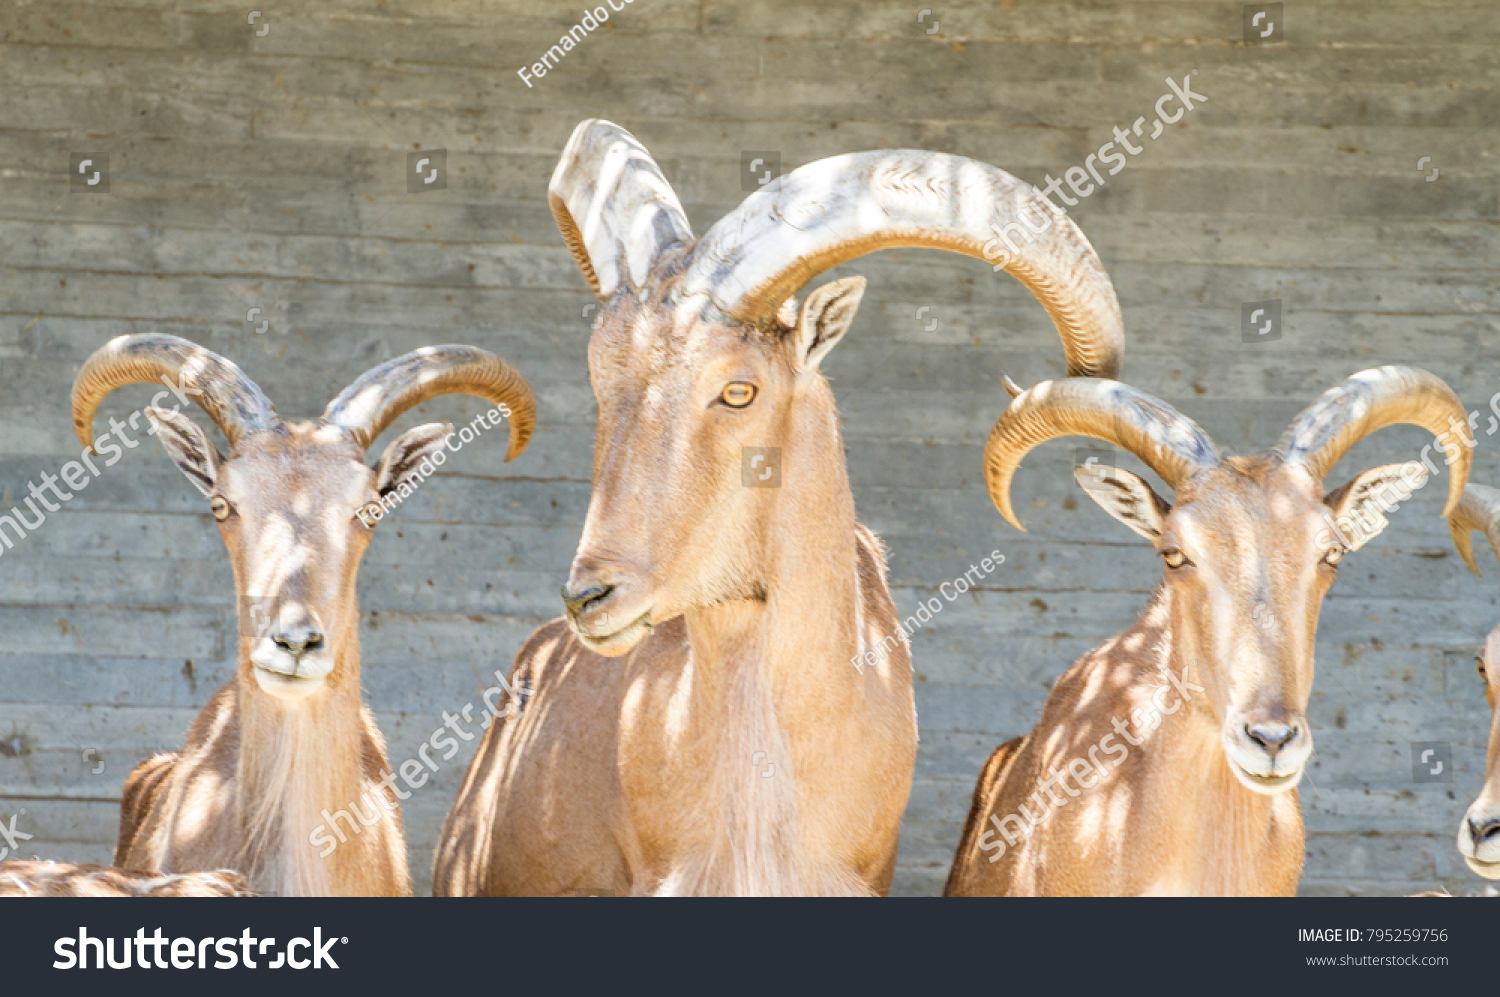 group of mountain goats, Family mammals with large horns #795259756